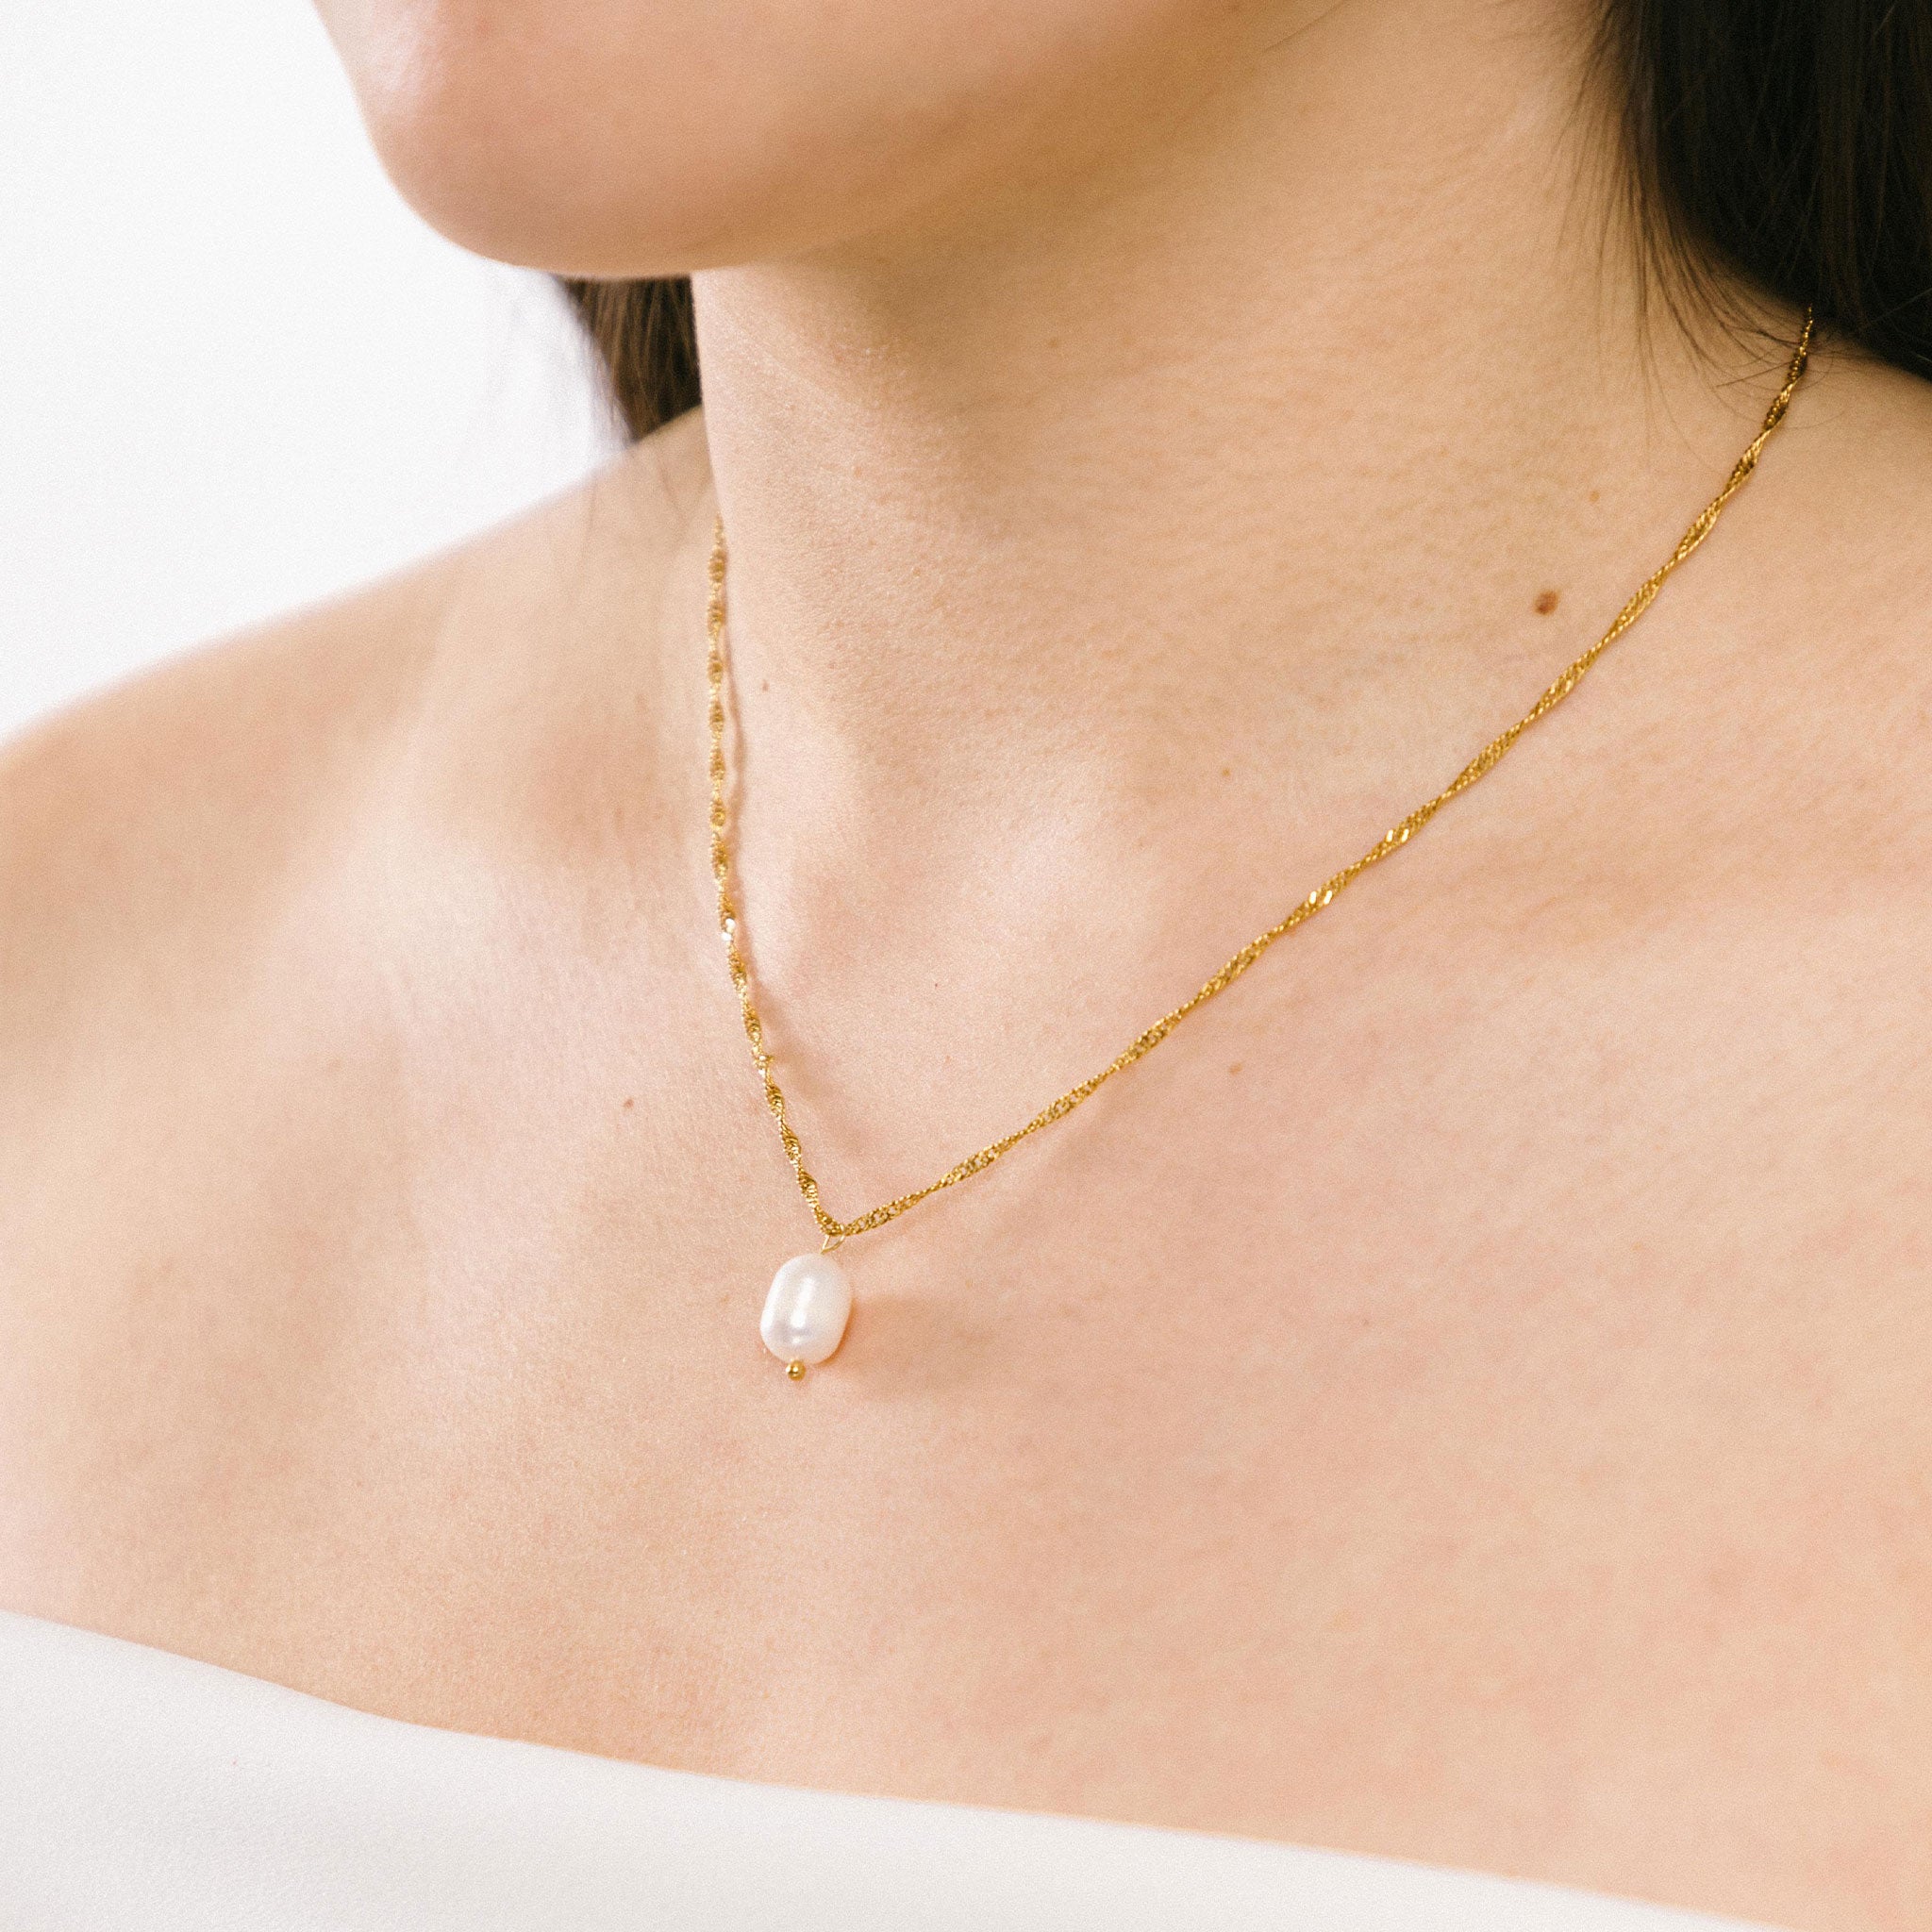 A model wearing the Ava Pearl Necklace, an elegant piece, decorated with a Freshwater Pearl and framed in 18K Gold Plated Stainless Steel. Its water-resistance and hypoallergenic qualities make it a luxurious and comfortable complement to any jewelry repertoire.